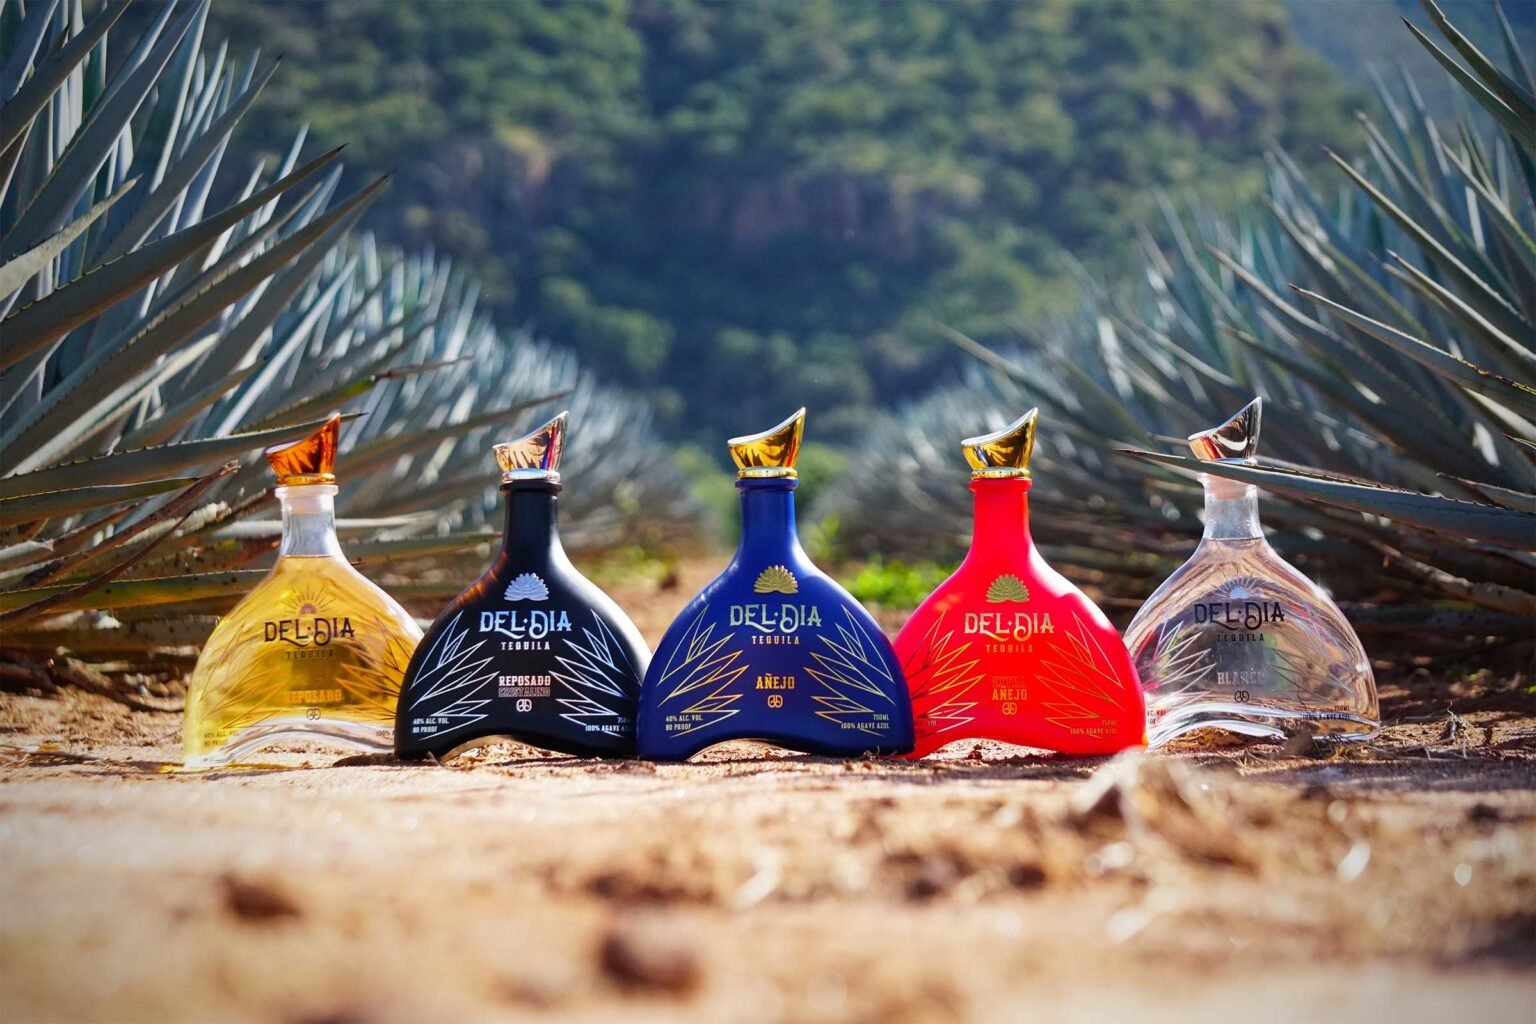 Del_Dia_Tequila-Our_tequilas-1536x1024.jpg